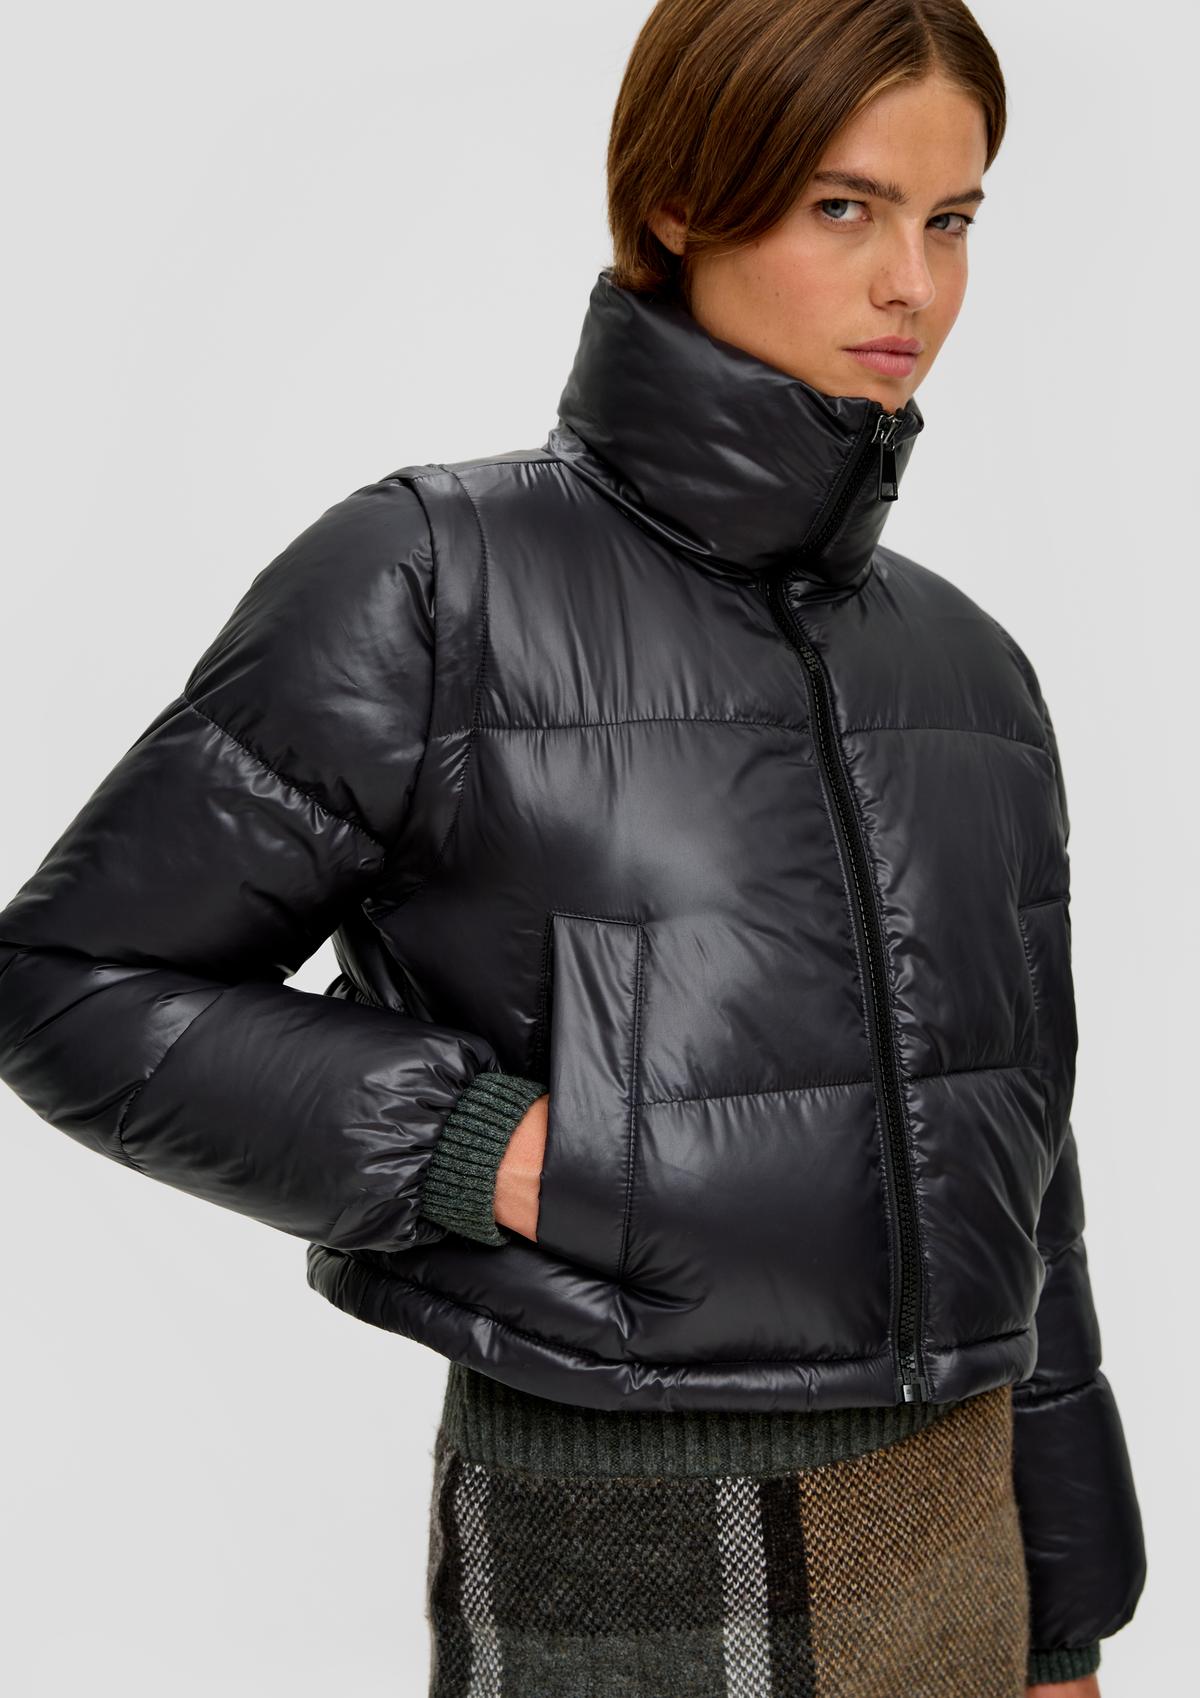 Short puffer jacket with removable sleeves